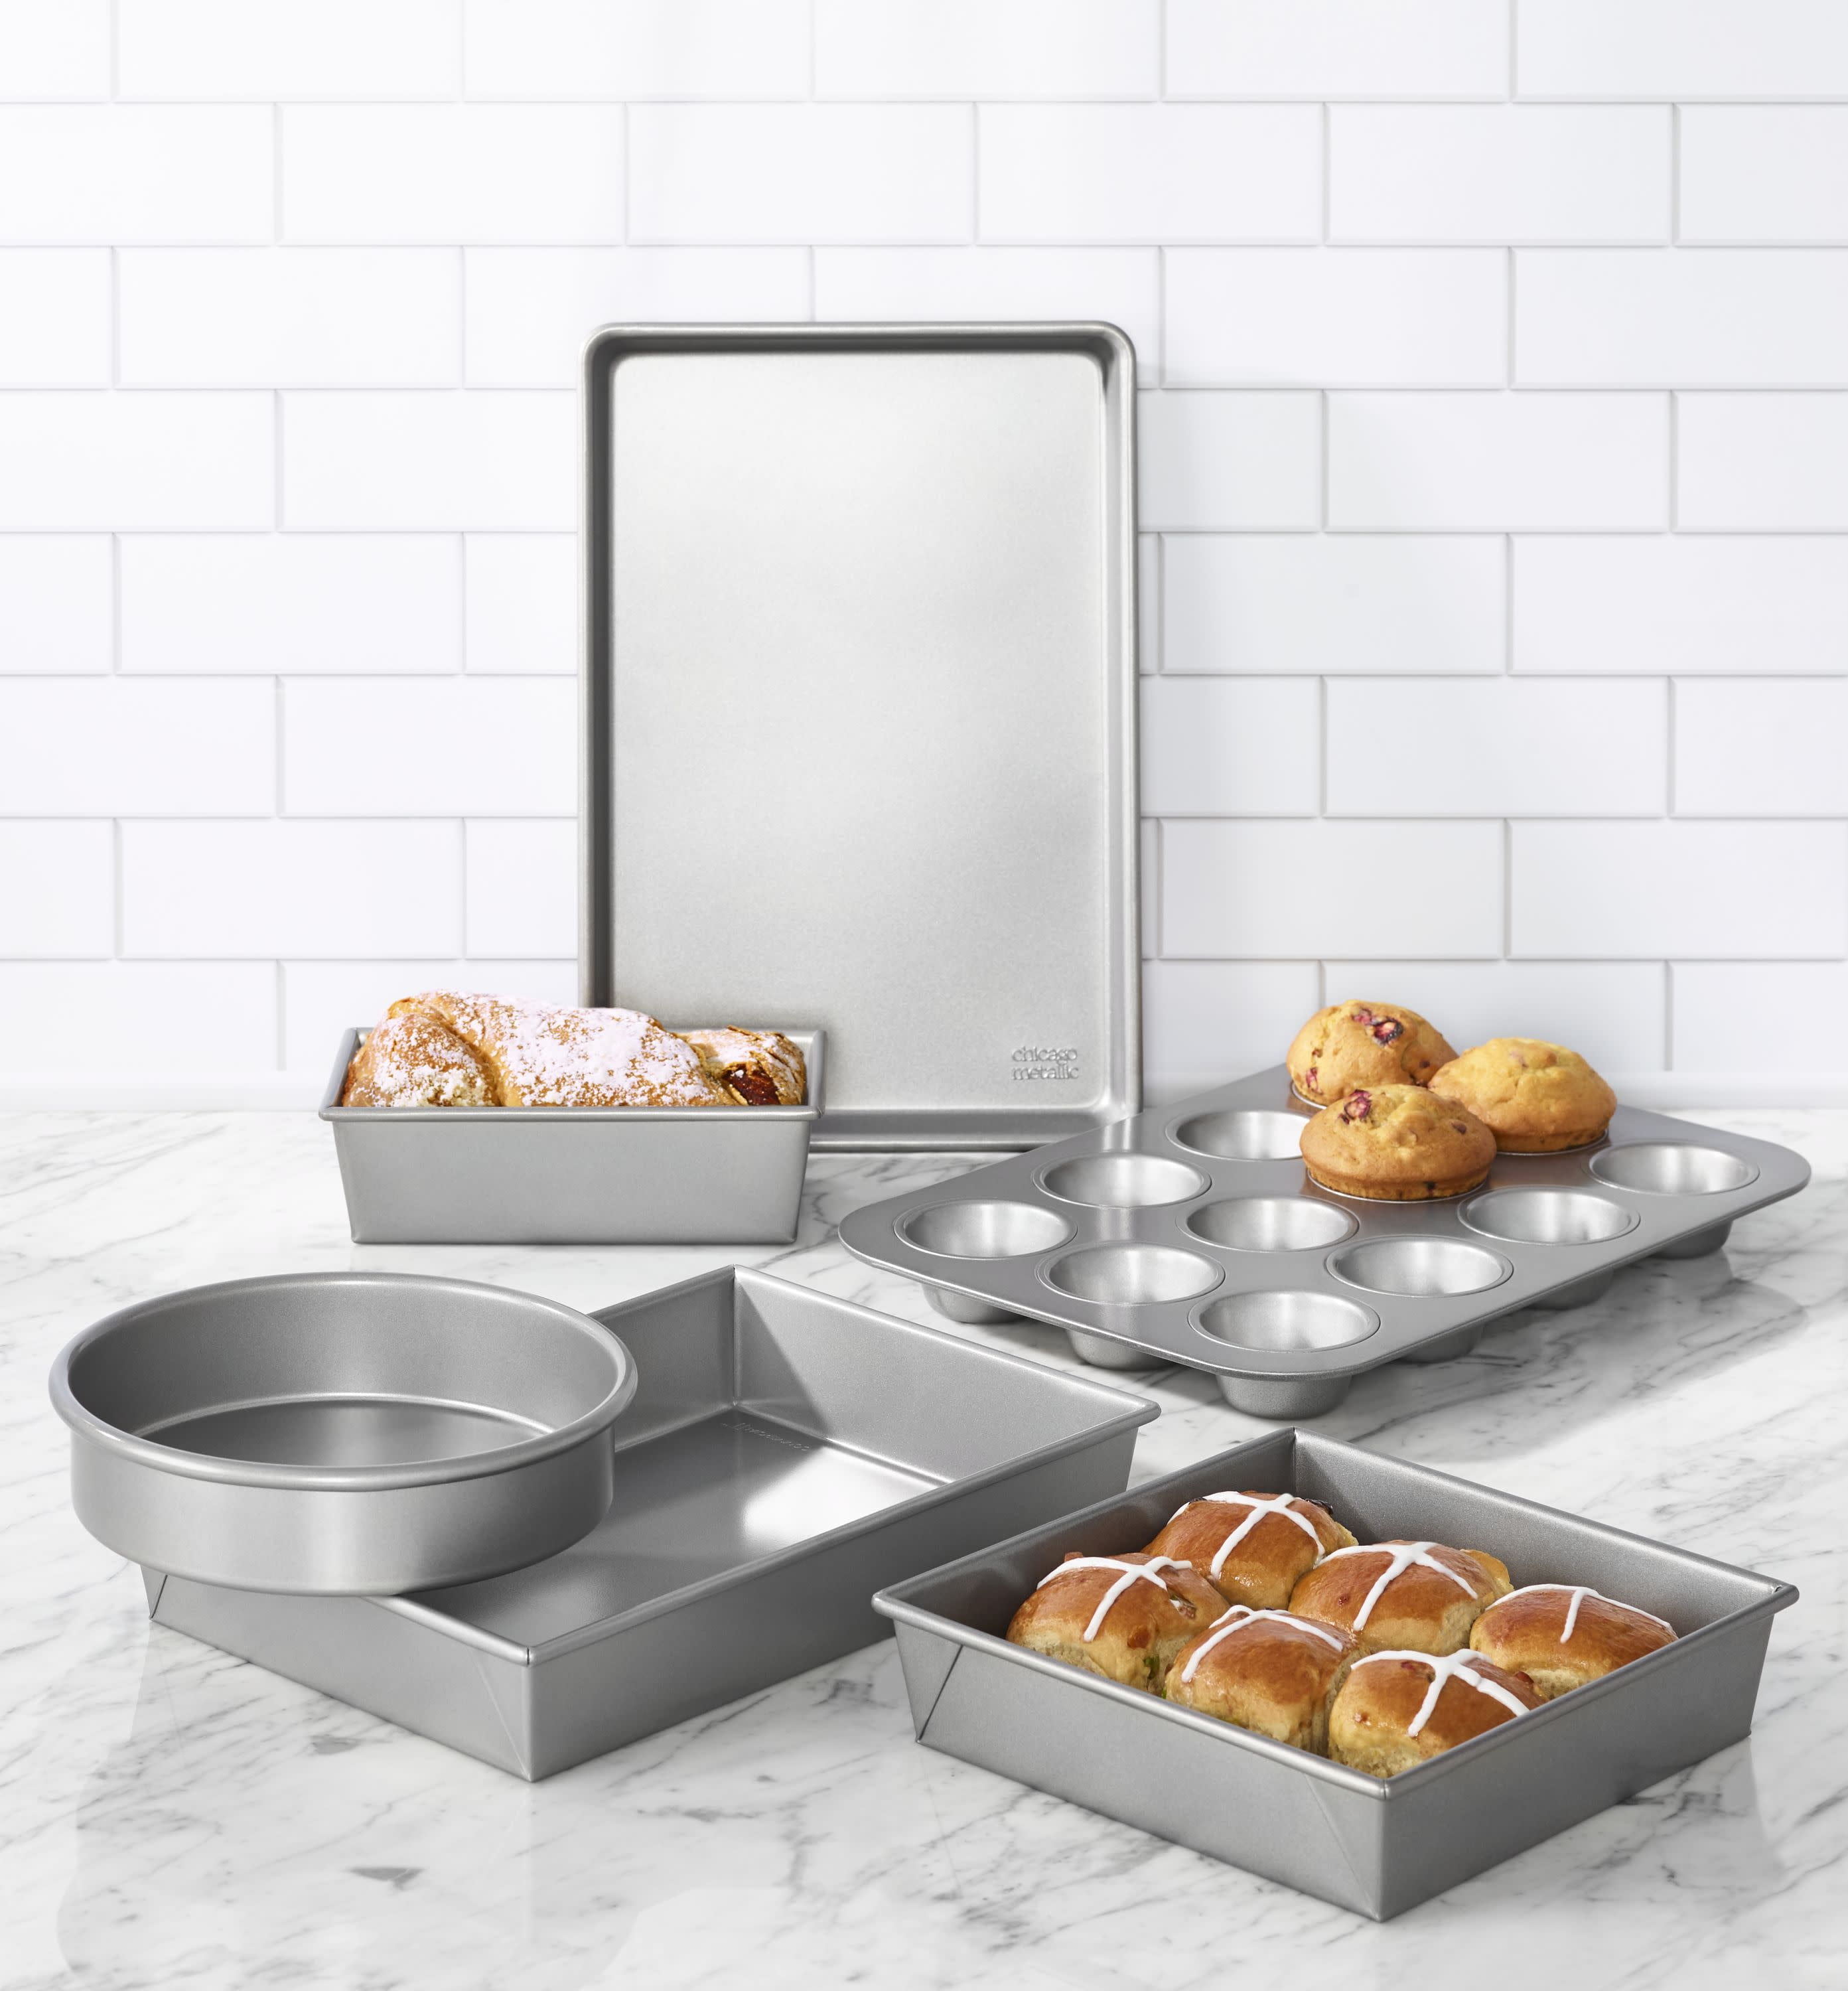 Chicago Metallic Commercial II Non-Stick 9-Inch Square Cake Pan. Make  traditional square cakes or layer cakes, brownies, casseroles, and more